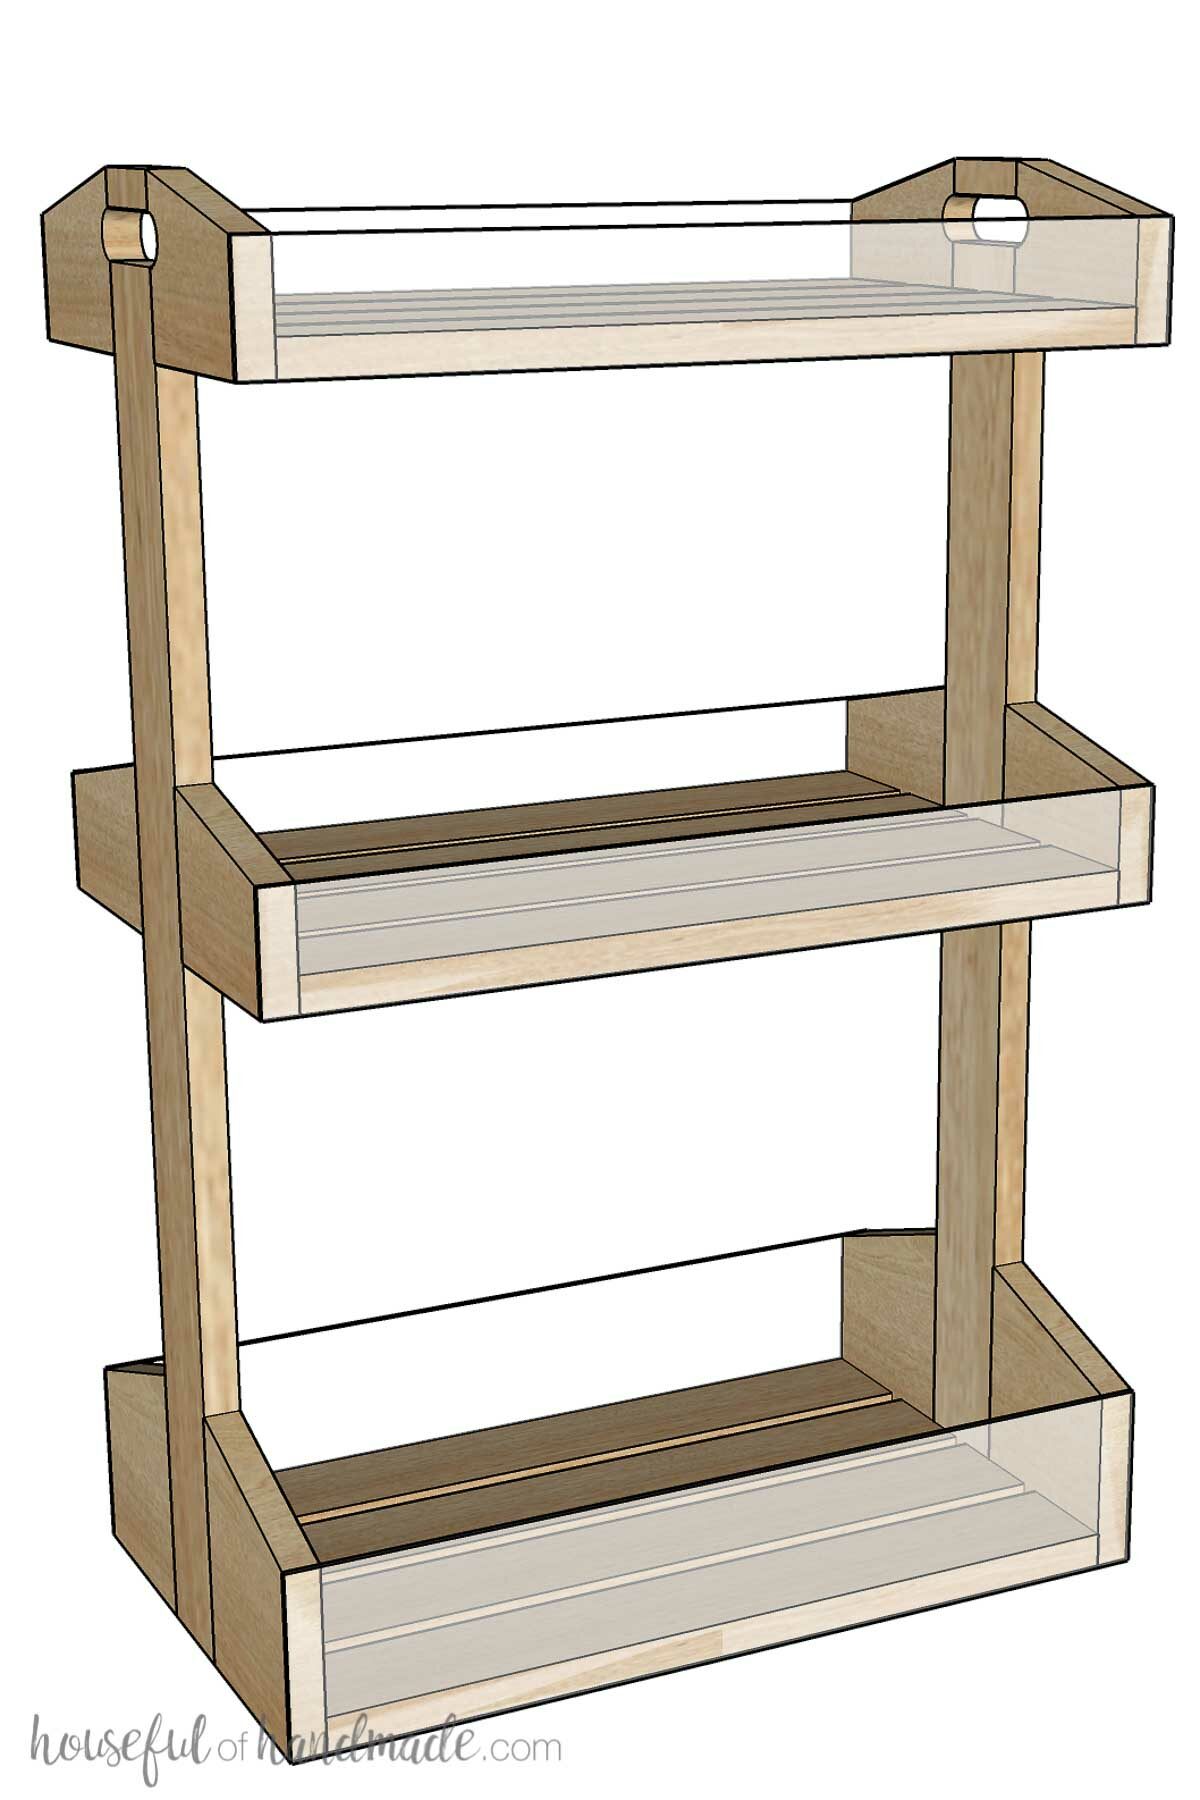 3D sketch of the wood rolling cart with 3 tiers with see through fronts. 